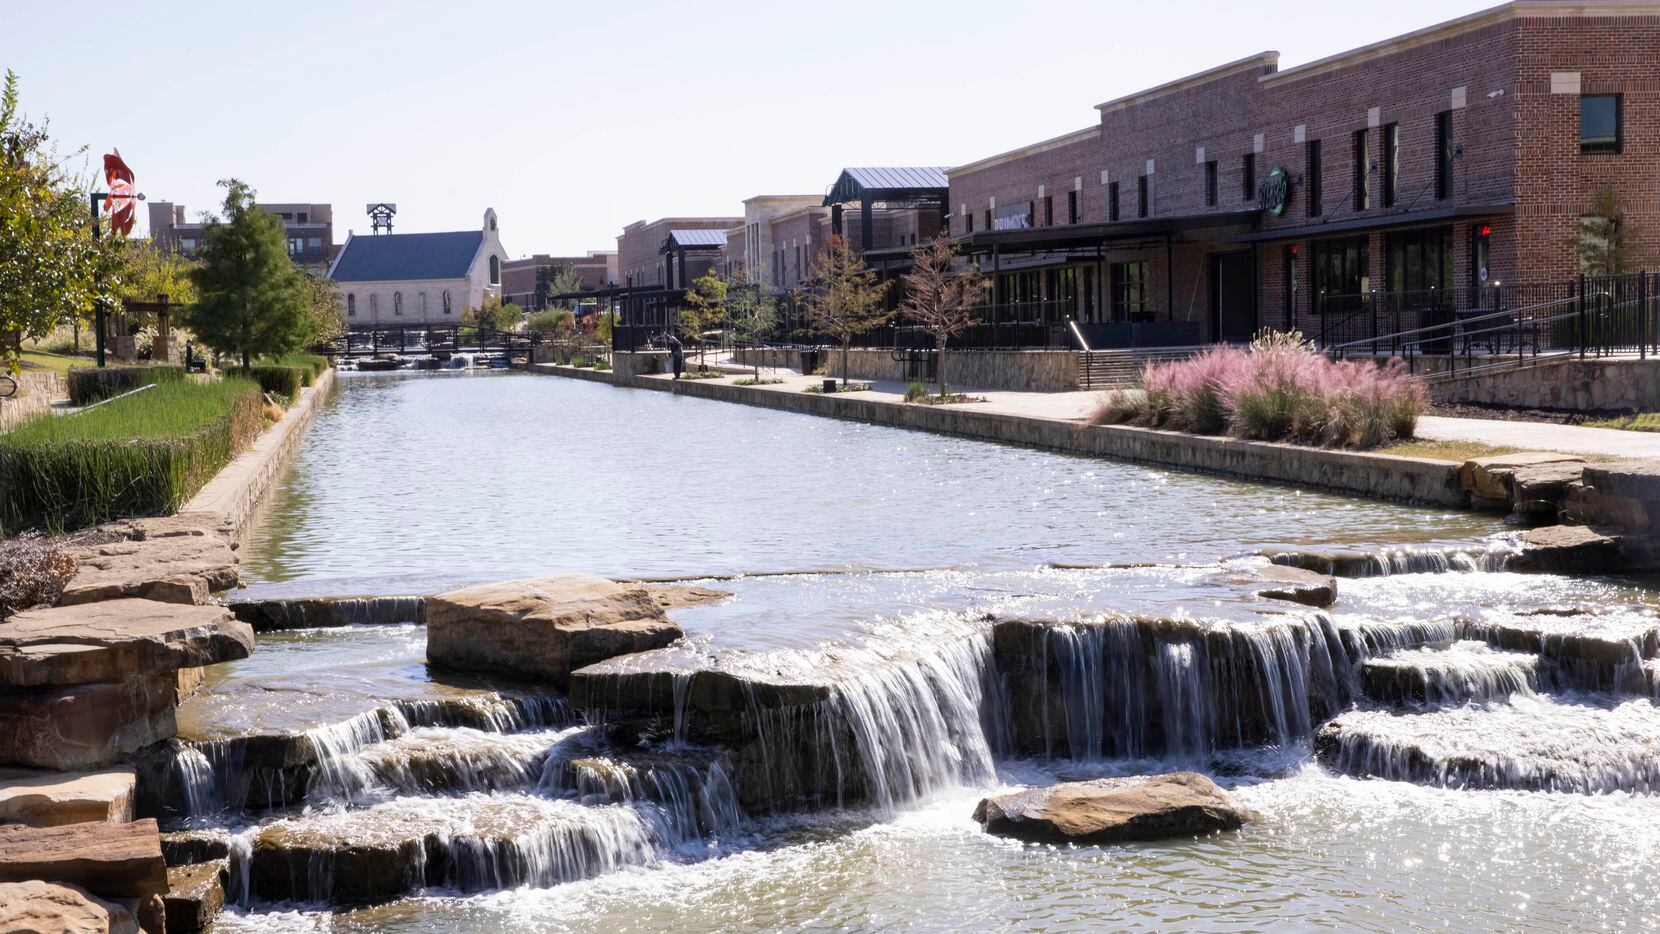 The River Walk at Central Park is a manmade water feature tucked behind the intersection of Cross Timbers and Long Prairie roads in Flower Mound. In the red brick building on the right, the developer has installed five restaurants and bars. On the left (not pictured) is a new residential area.